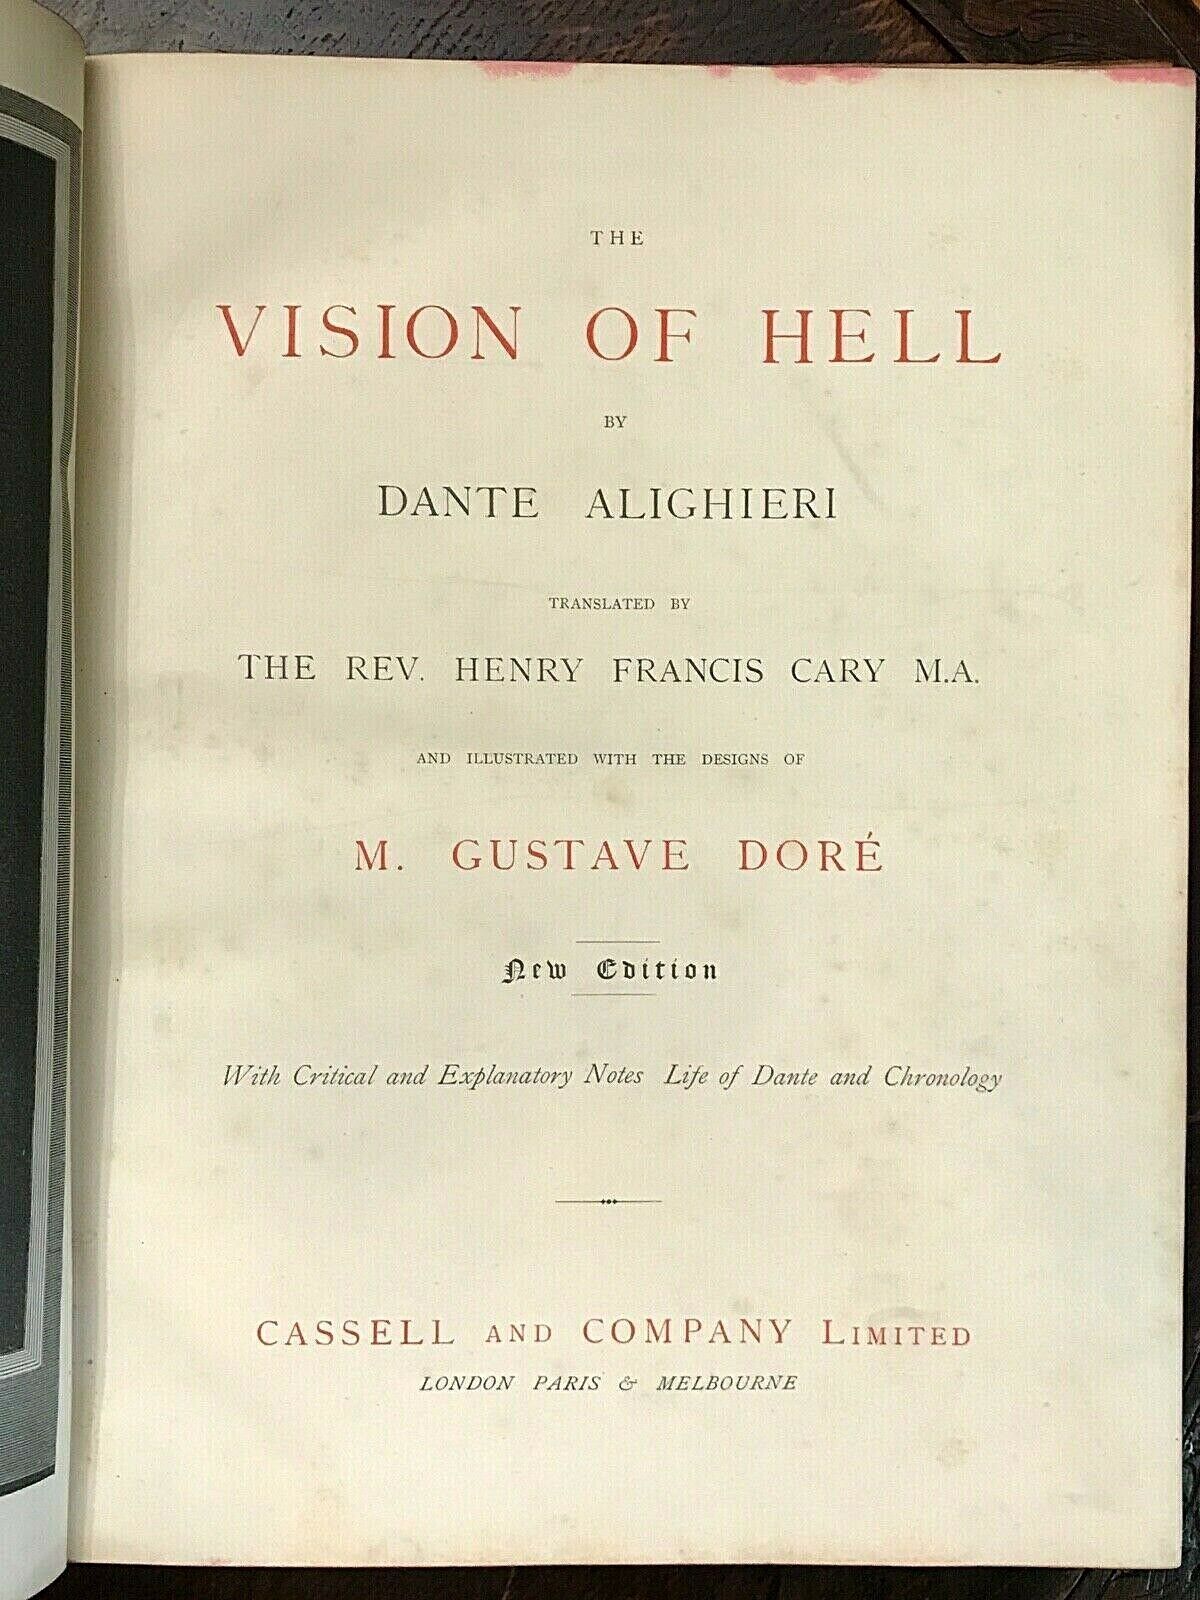 The Inferno Dante Mentor Classic Gothic Novel Hell 